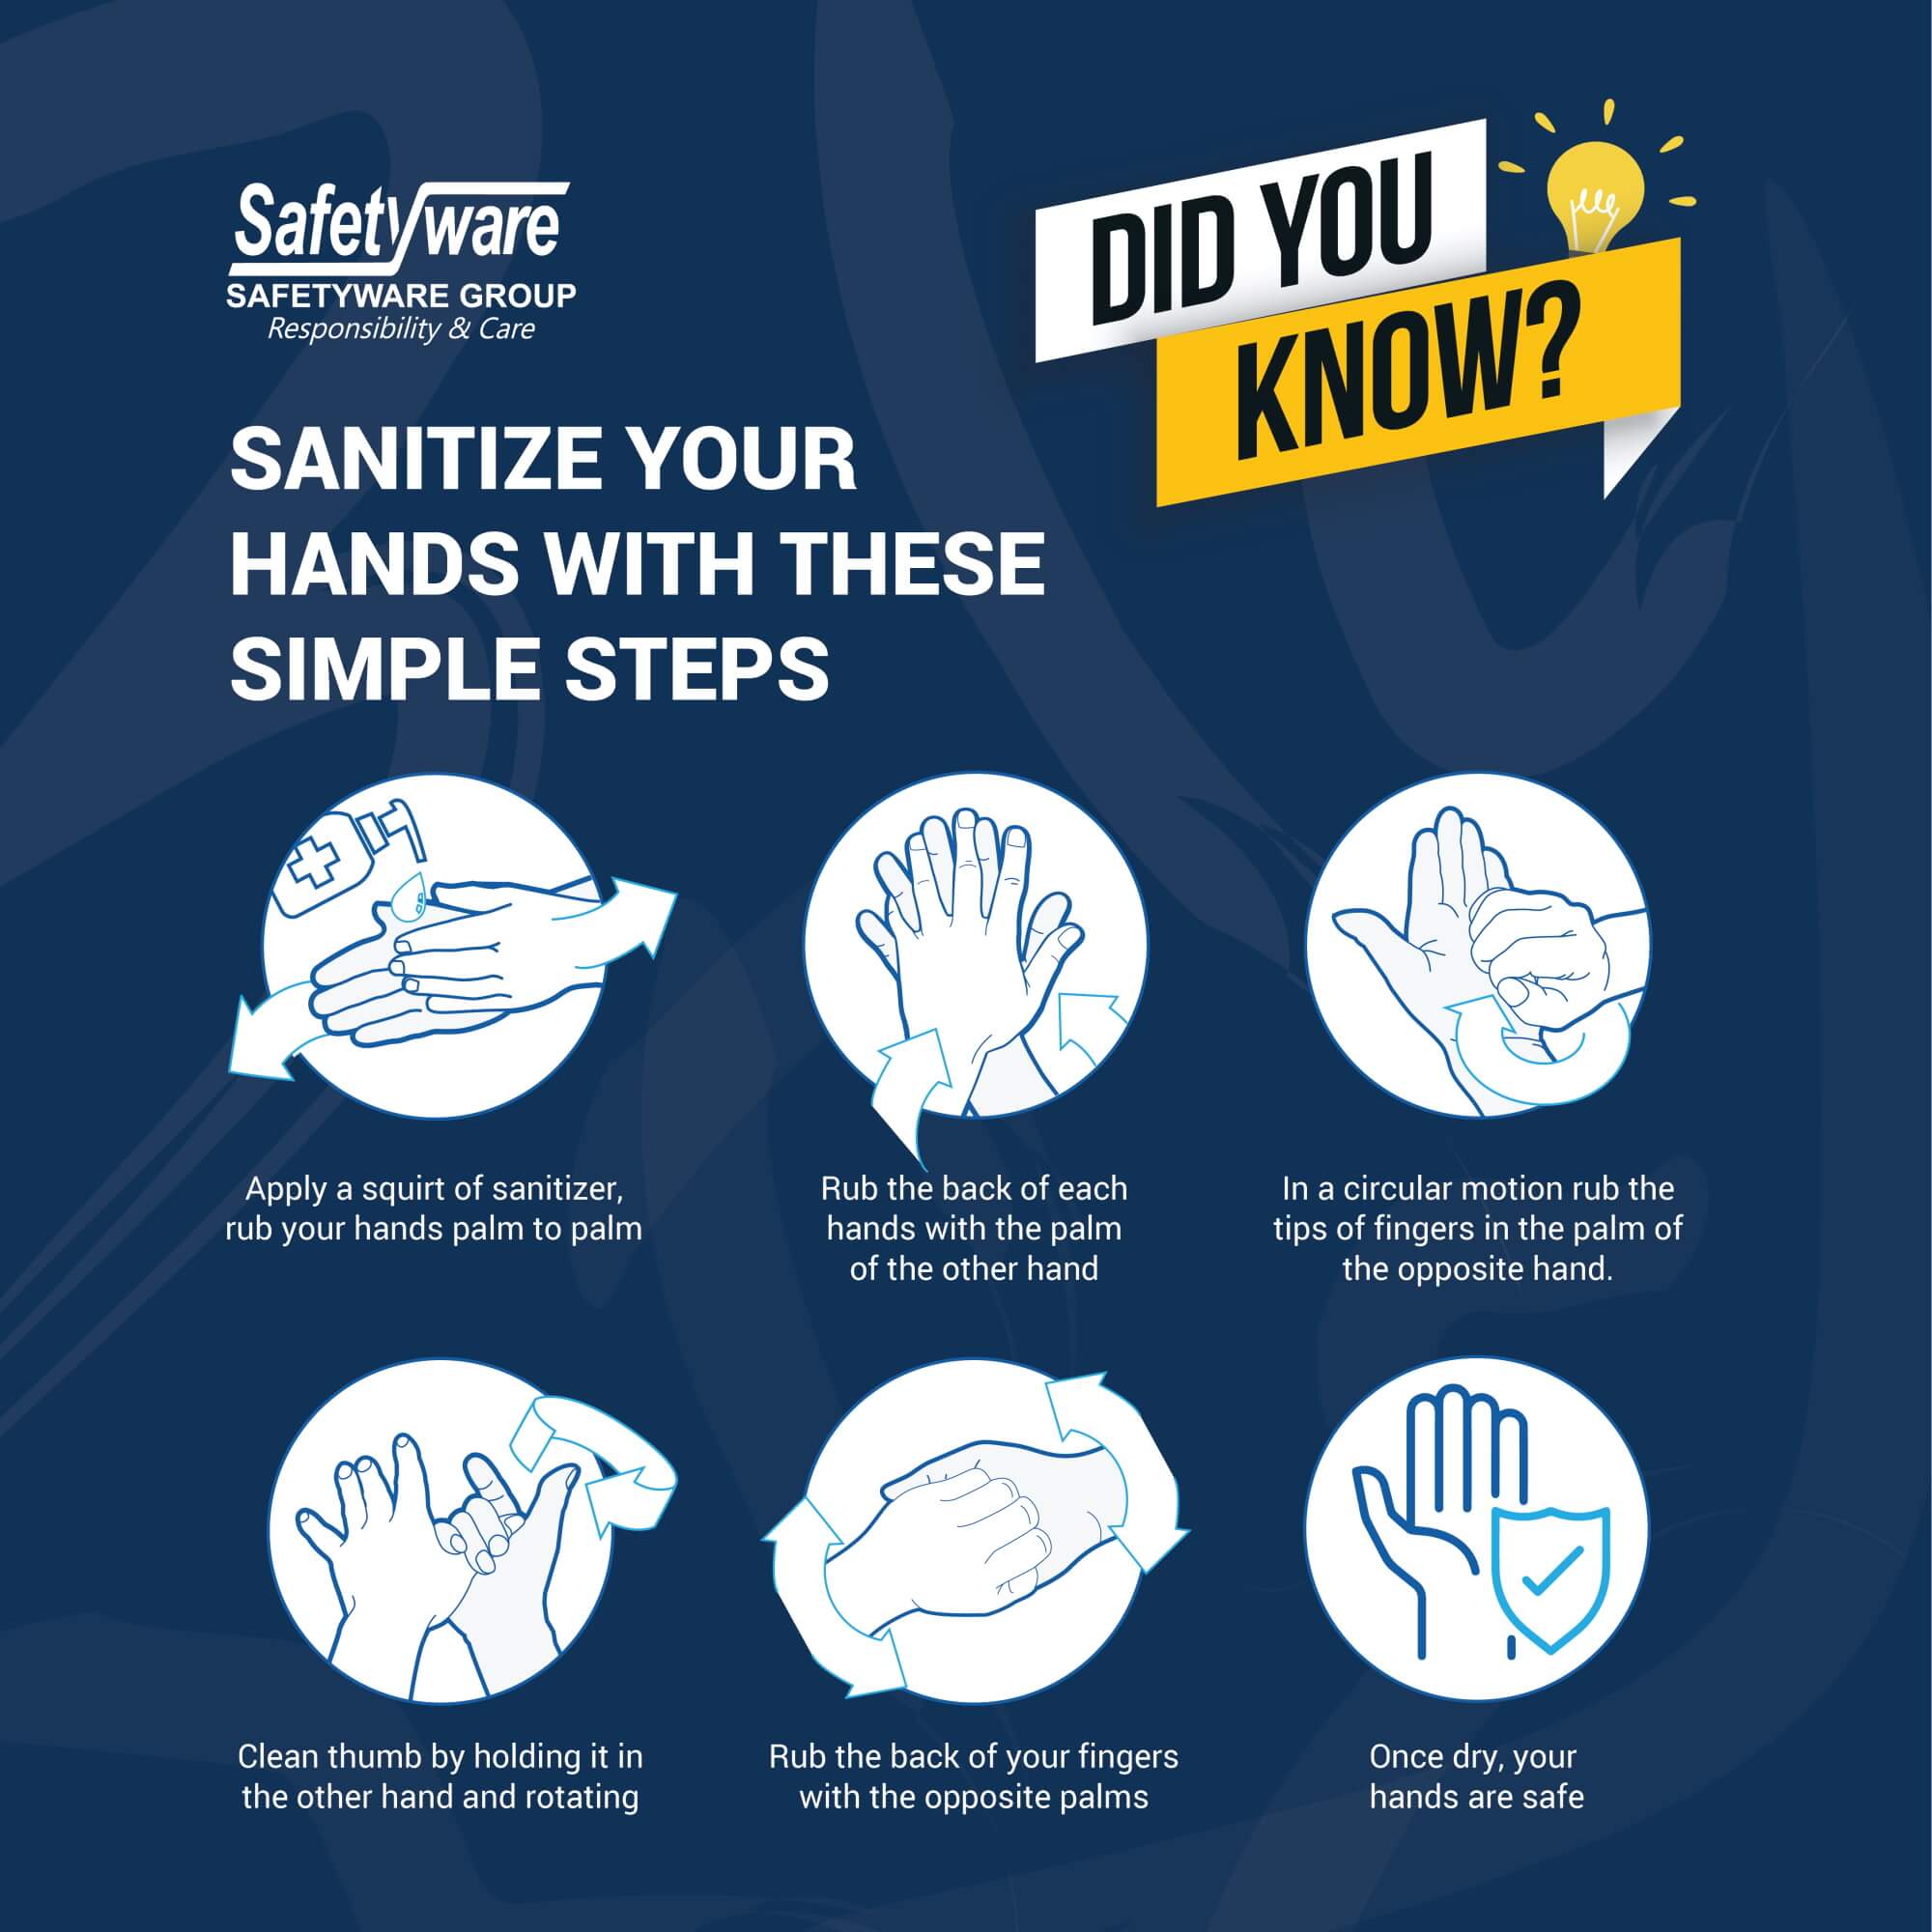 Sanitize your hands with these simple steps